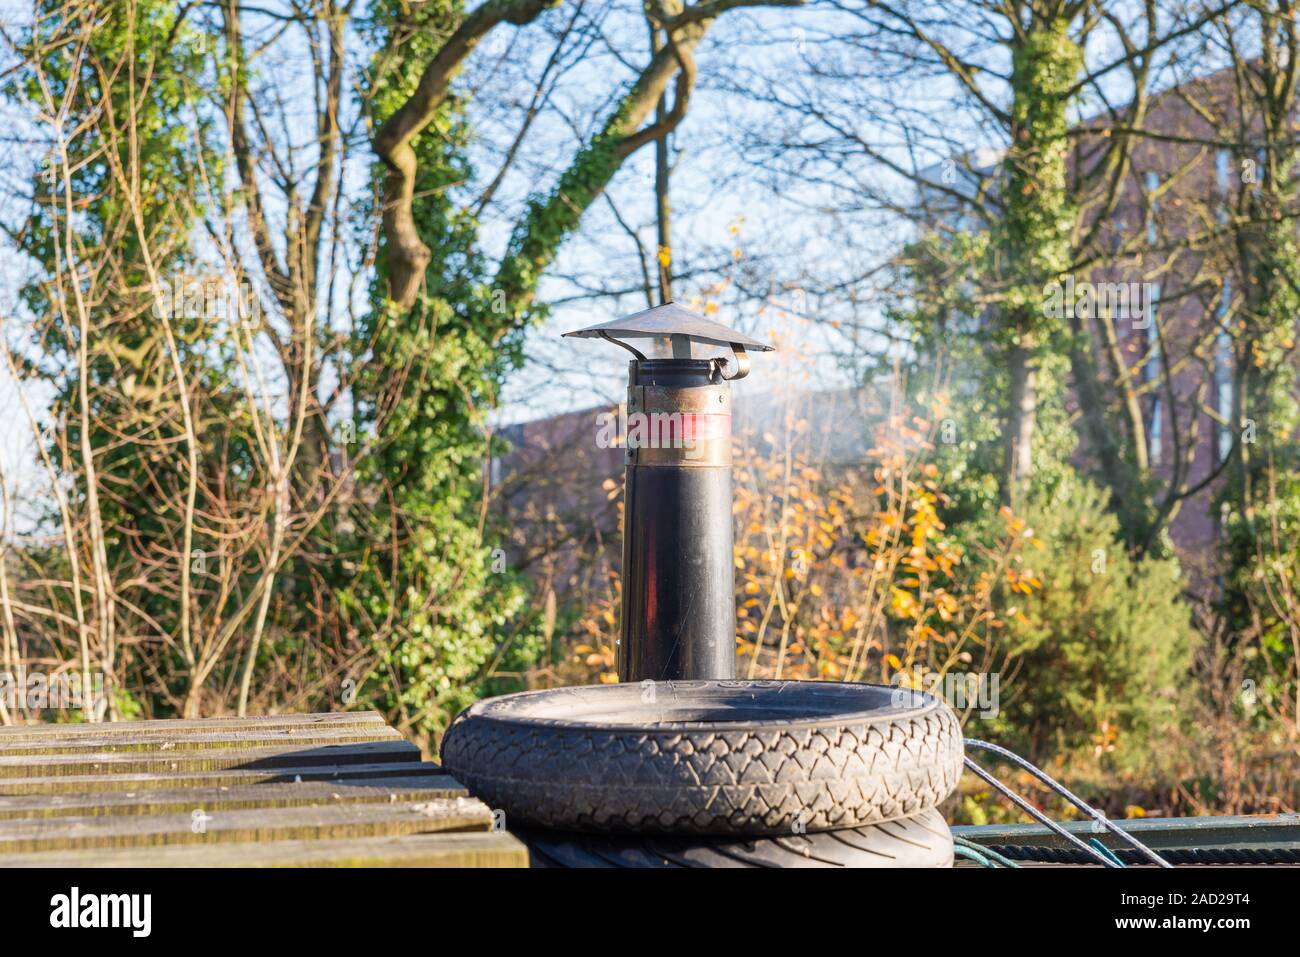 Smoke coming out of a chimney on a narrowboat moored on the Worcester and Birmingham canal in Selly Oak, Birmingham in autumn Stock Photo